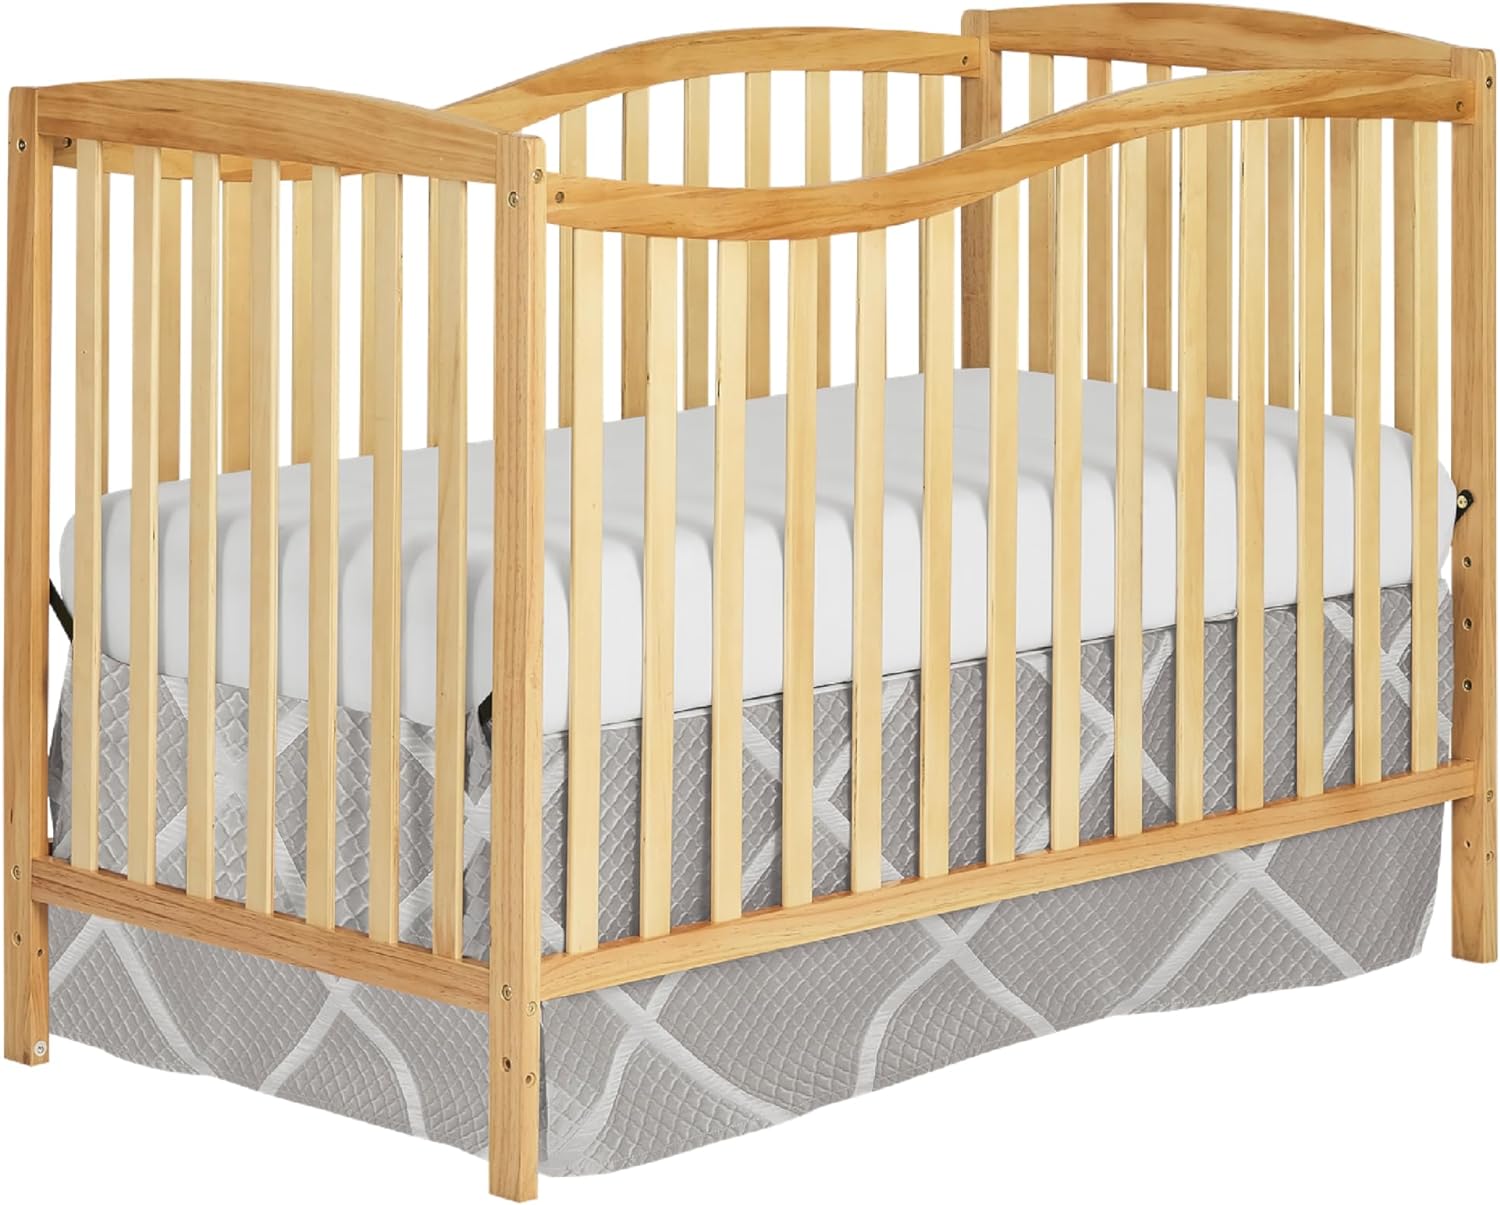 Dream On Me Chelsea 5-In-1 Convertible Crib In Natural, JPMA Certified Natural Inch (Pack of 1) Crib - image 1 of 9